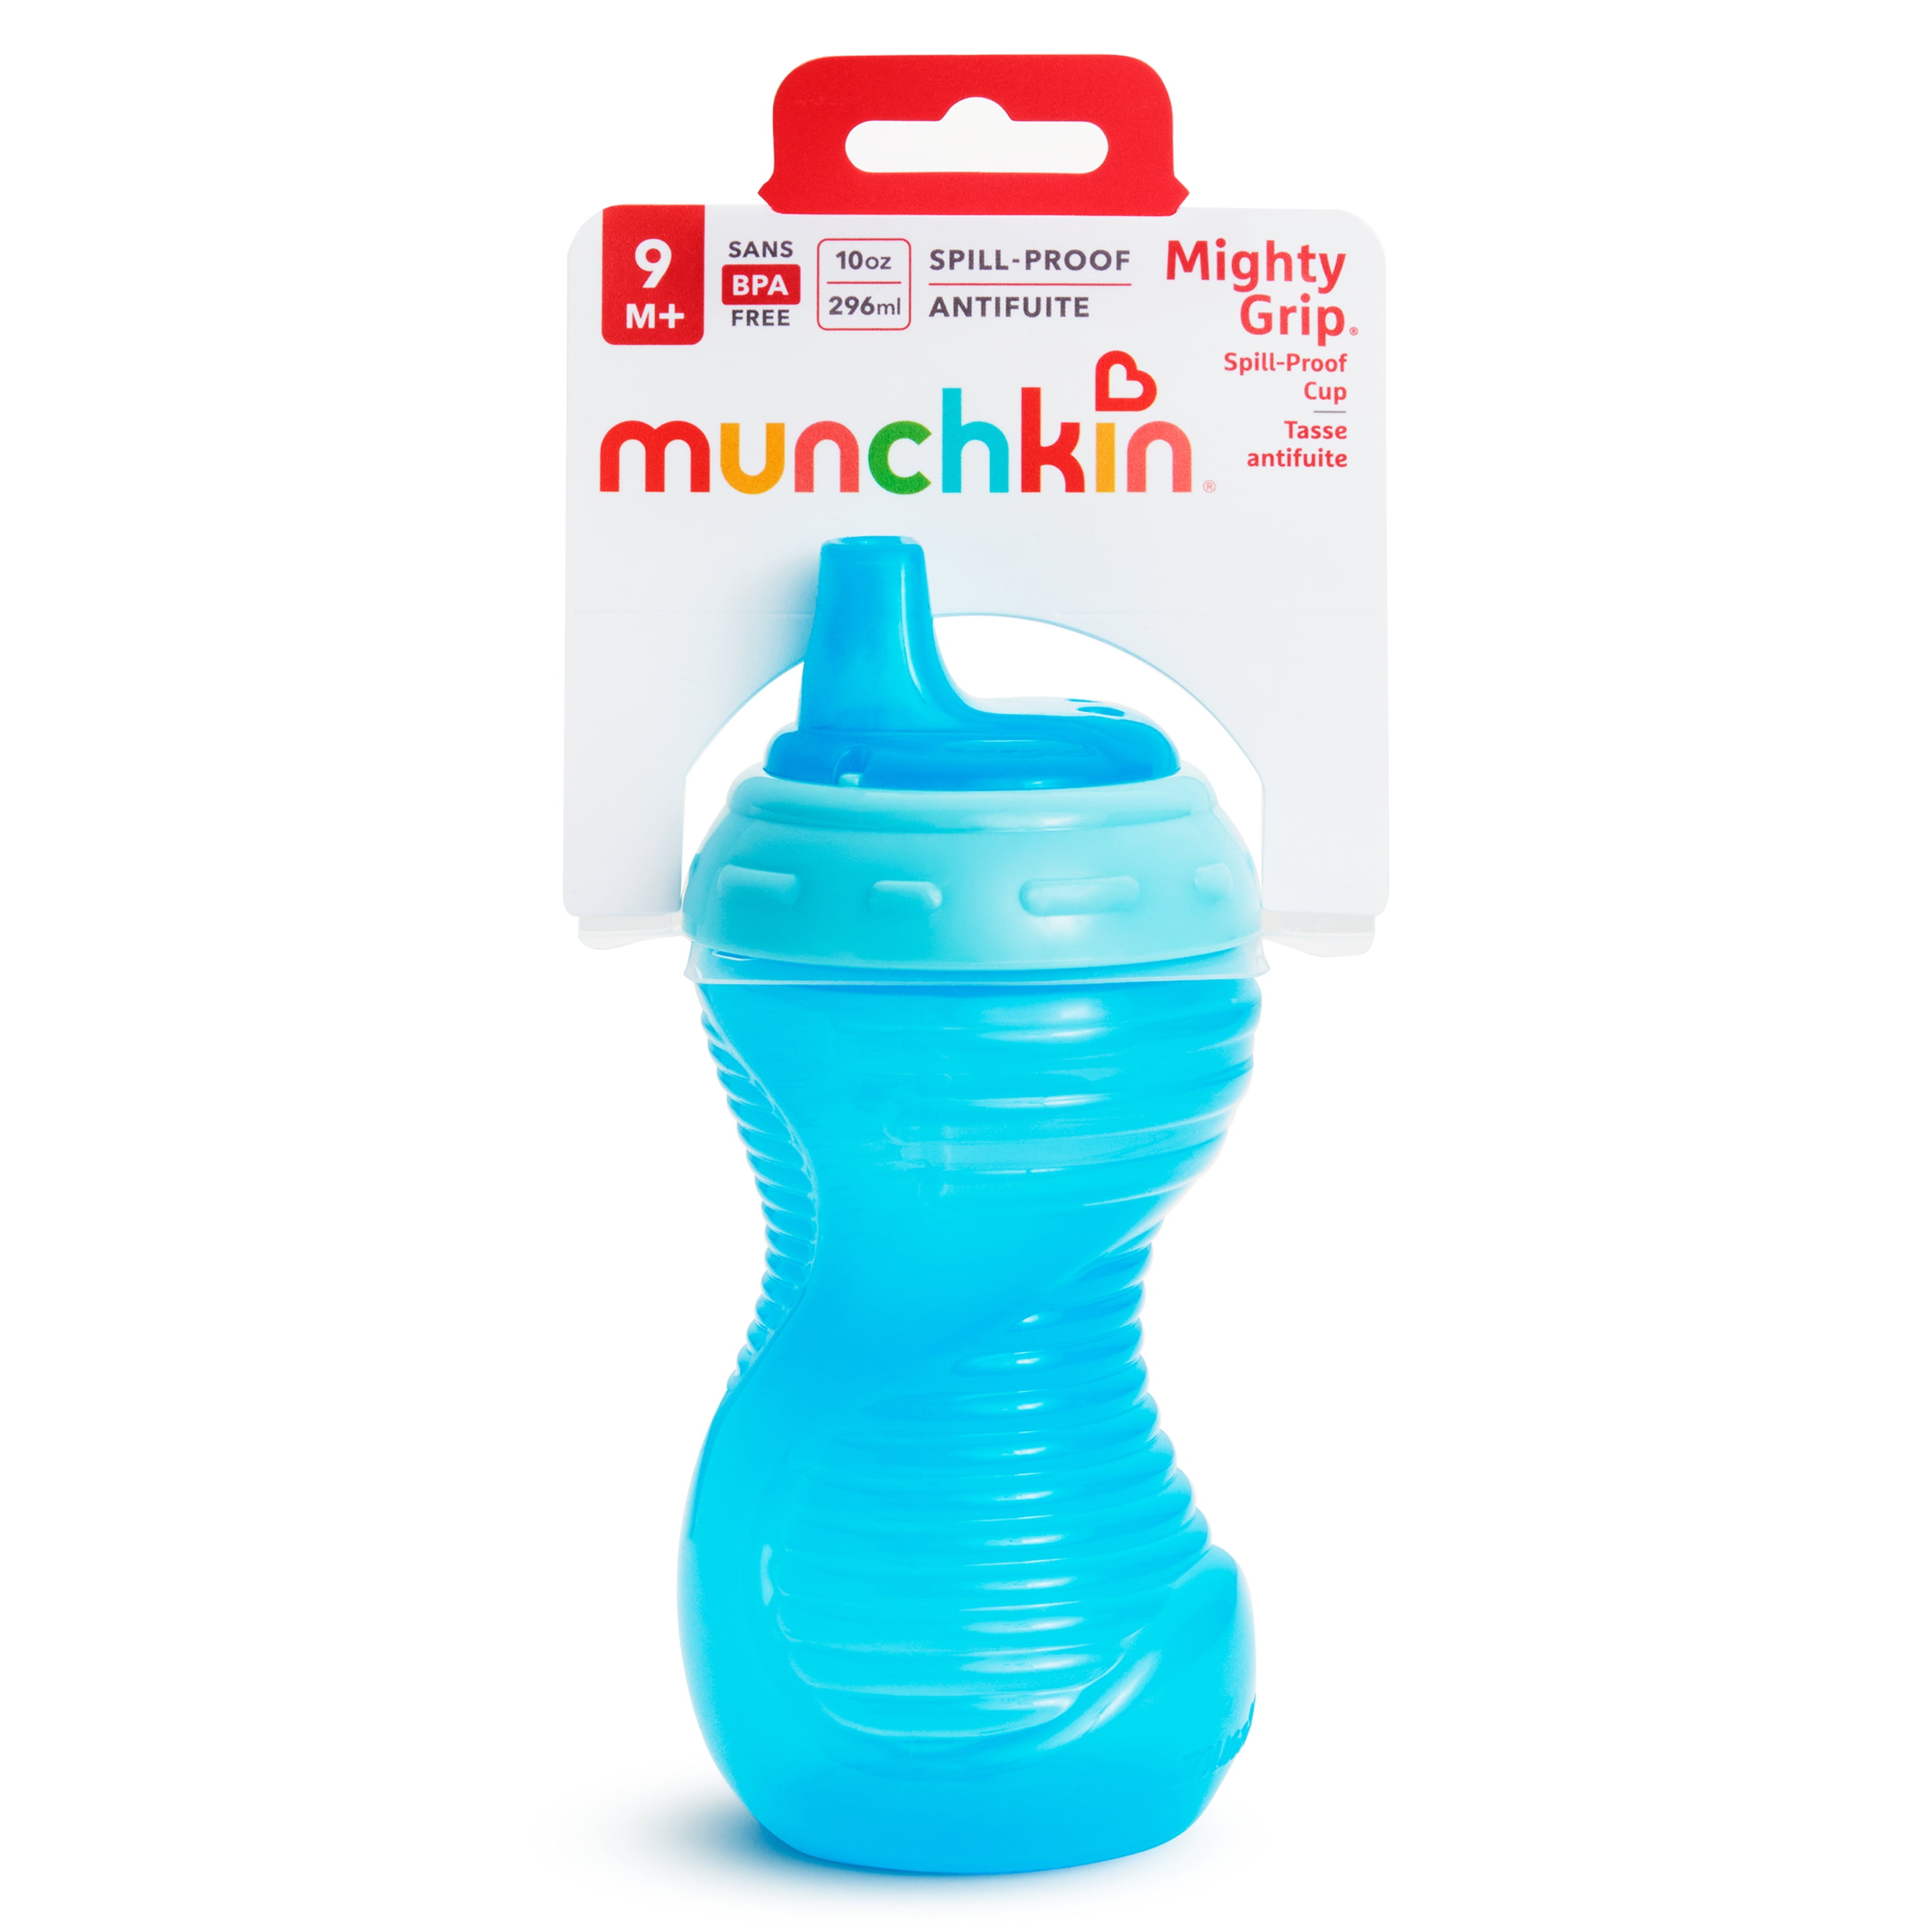 Munchkin Mighty Grip Flip Straw Cup BPA free - bottle cup for